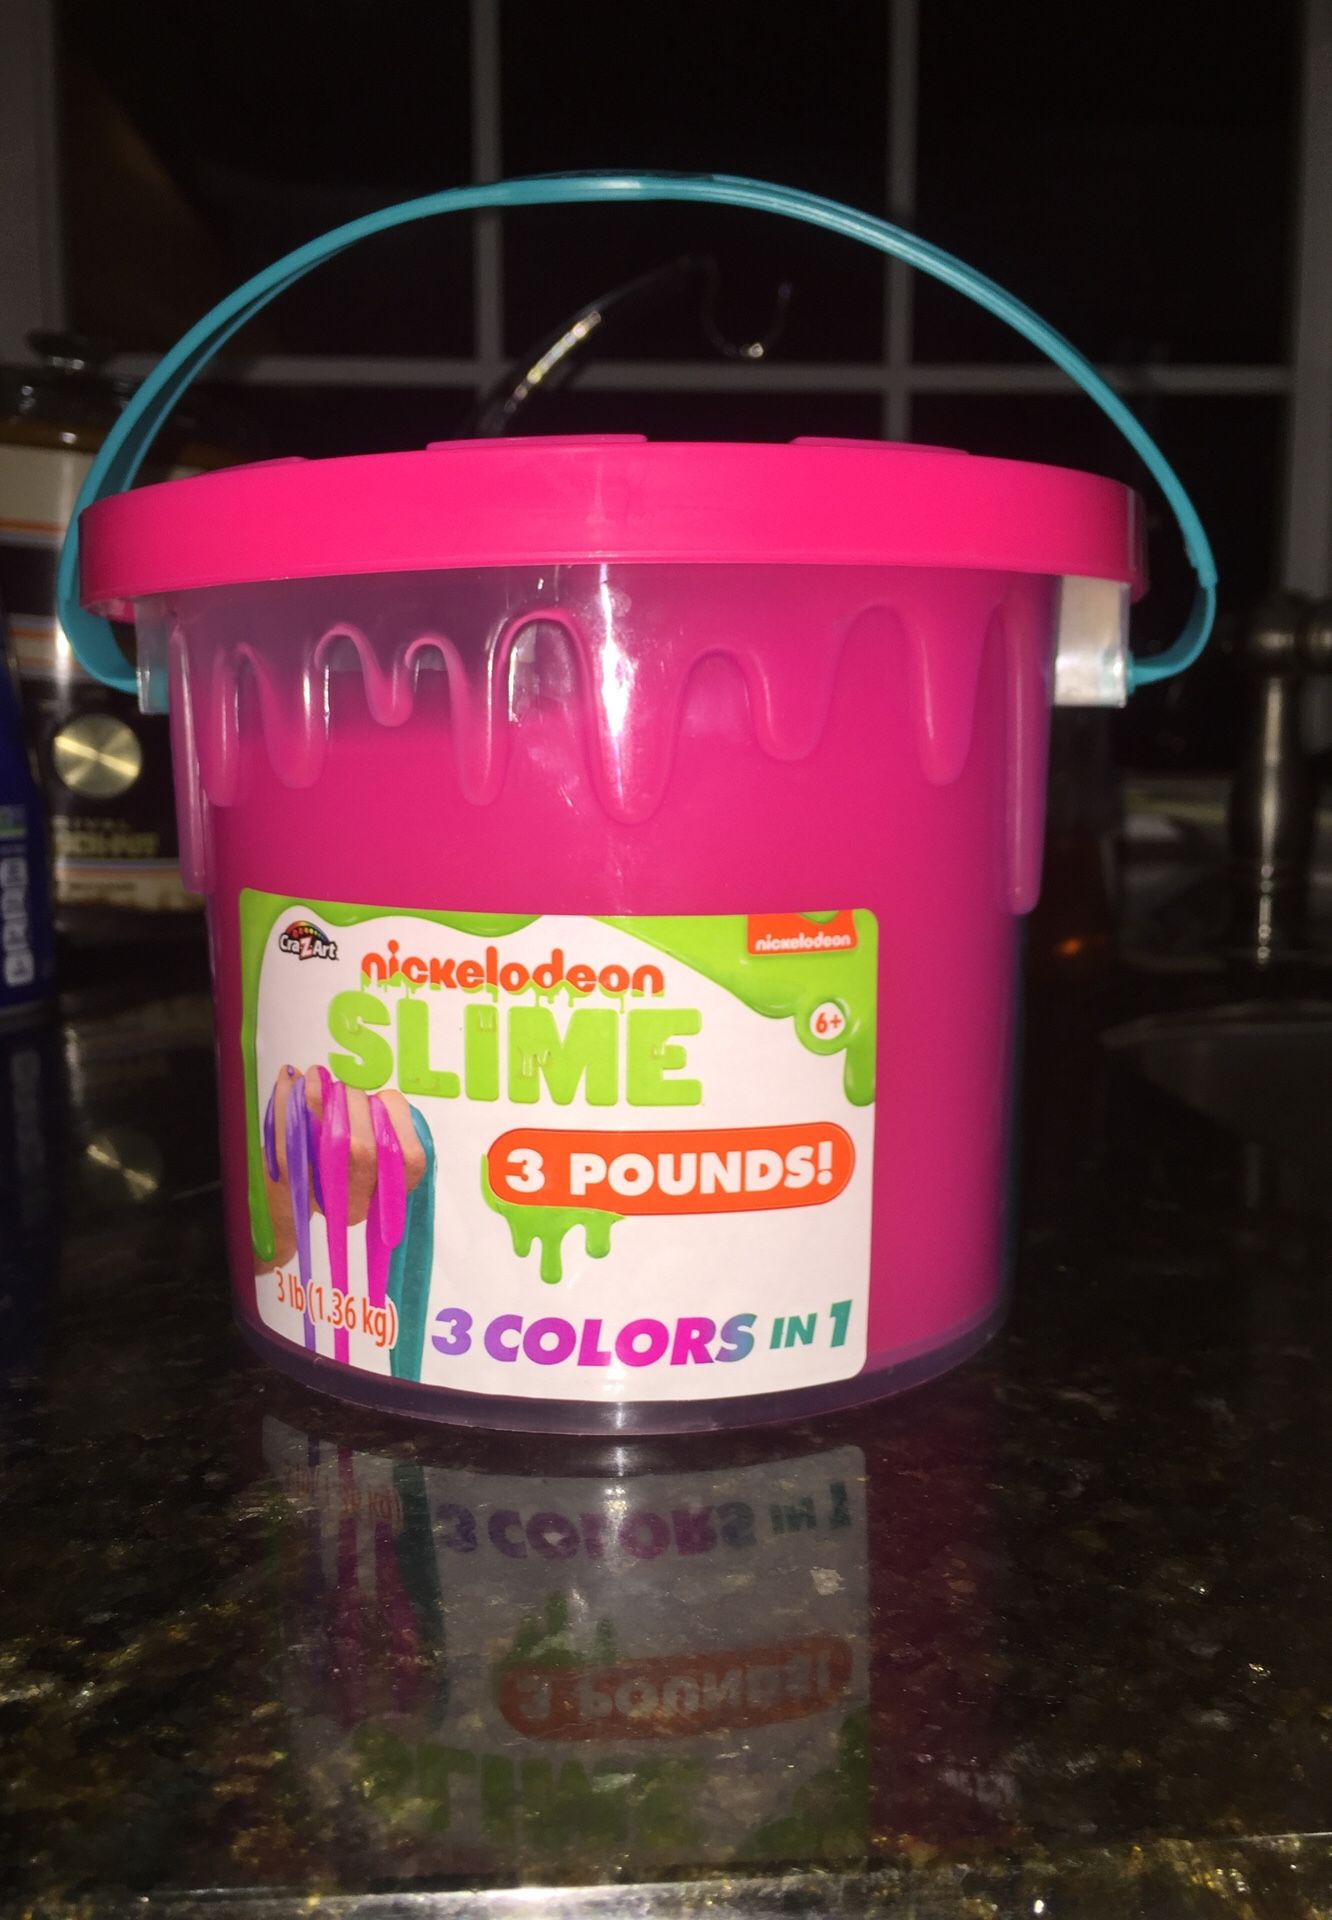 NEW! Nickelodeon tri-colored slime- 3 pound bucket!